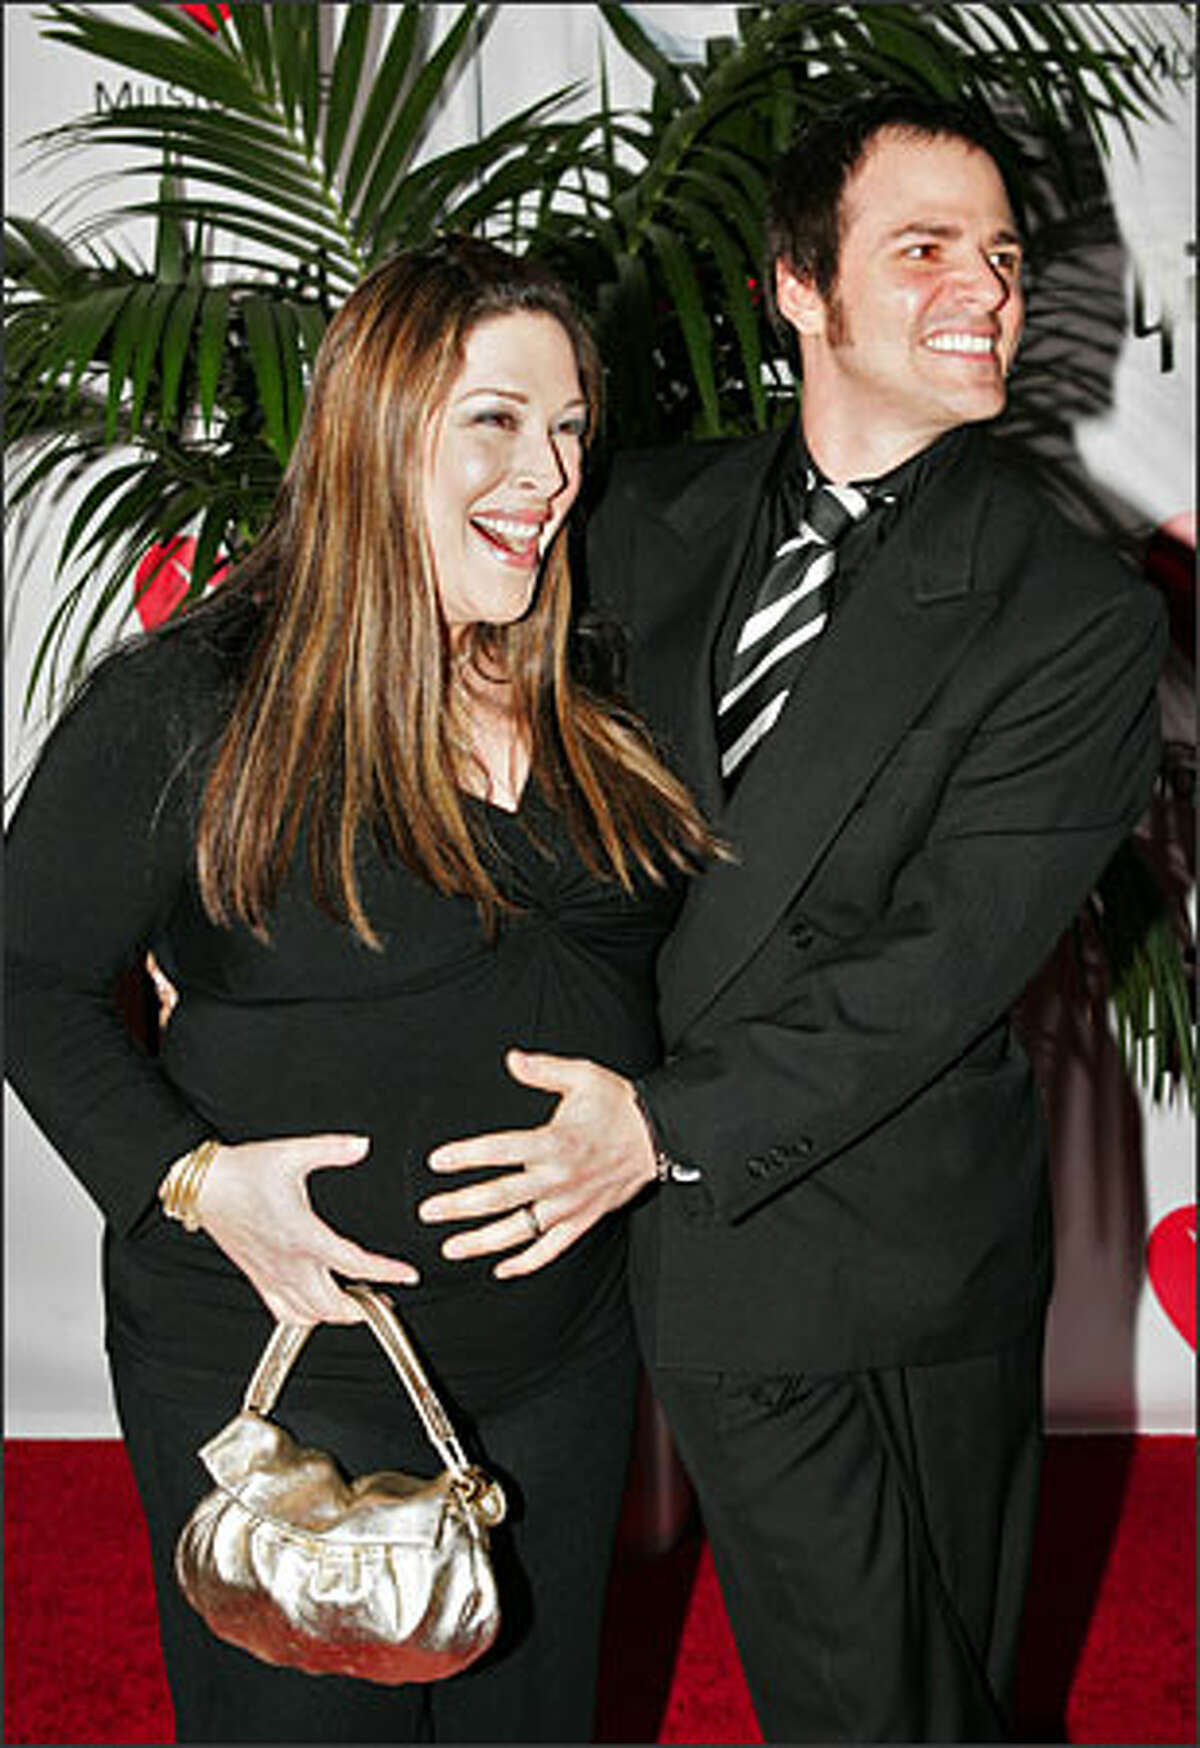 Carnie Wilson and her husband, Rob Bonfiglio, are parents of a baby girl, Lola Sophia. She is the first child for the couple, shown here at a tribute to Carnie's father, Brian Wilson, in February. The baby, born in Los Angeles, weighed 7 pounds, 2 ounces.